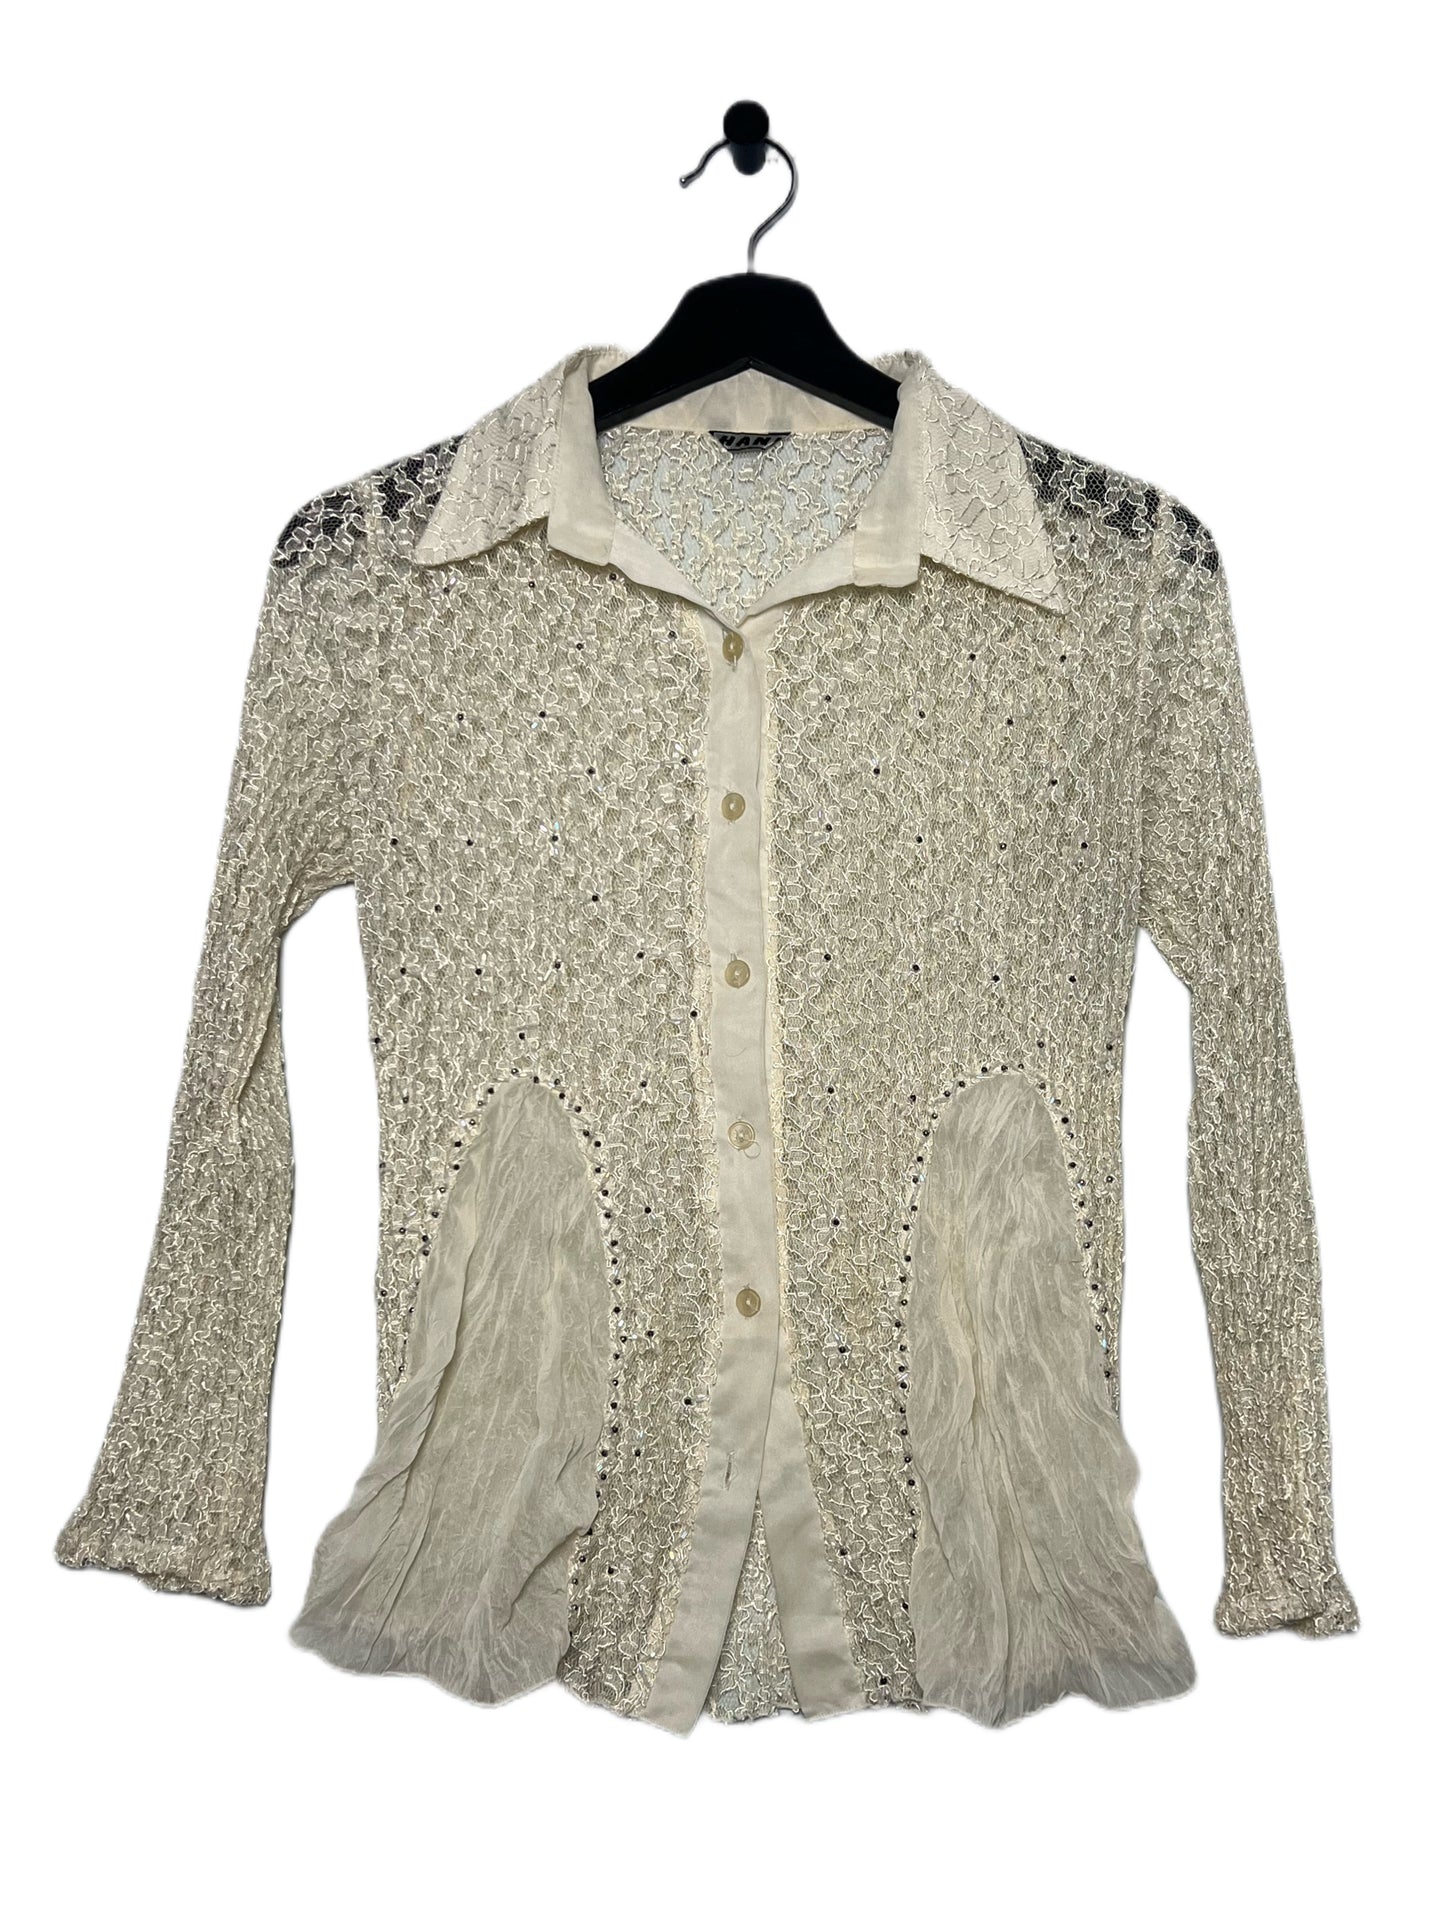 Lace Beaded Button Up Top